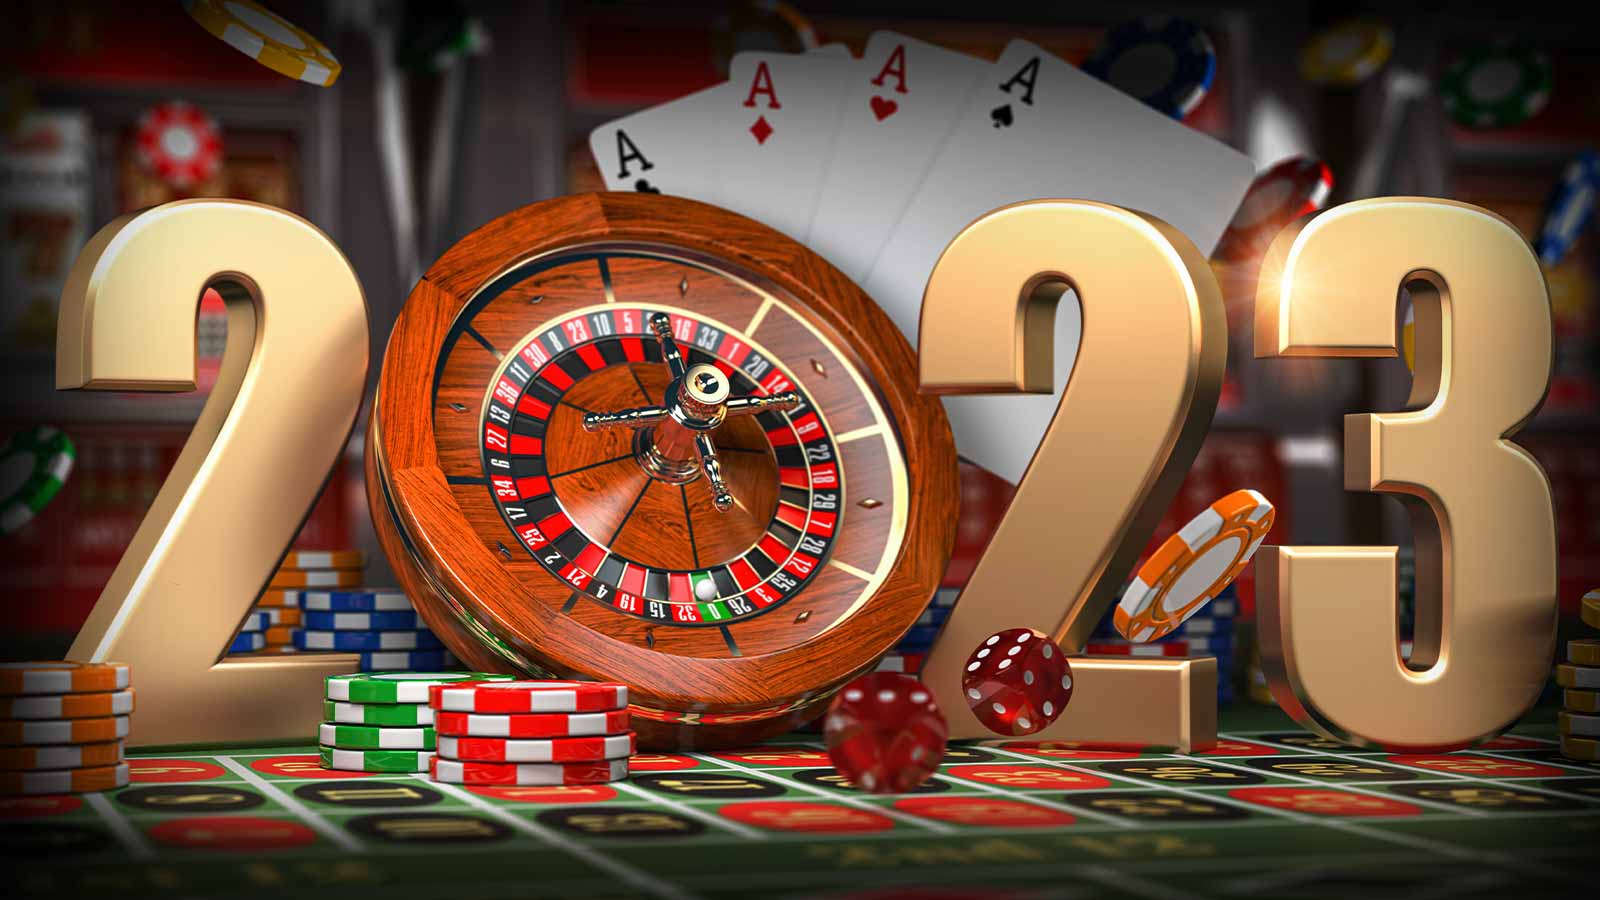 2023 Trends of online casino games to watch out